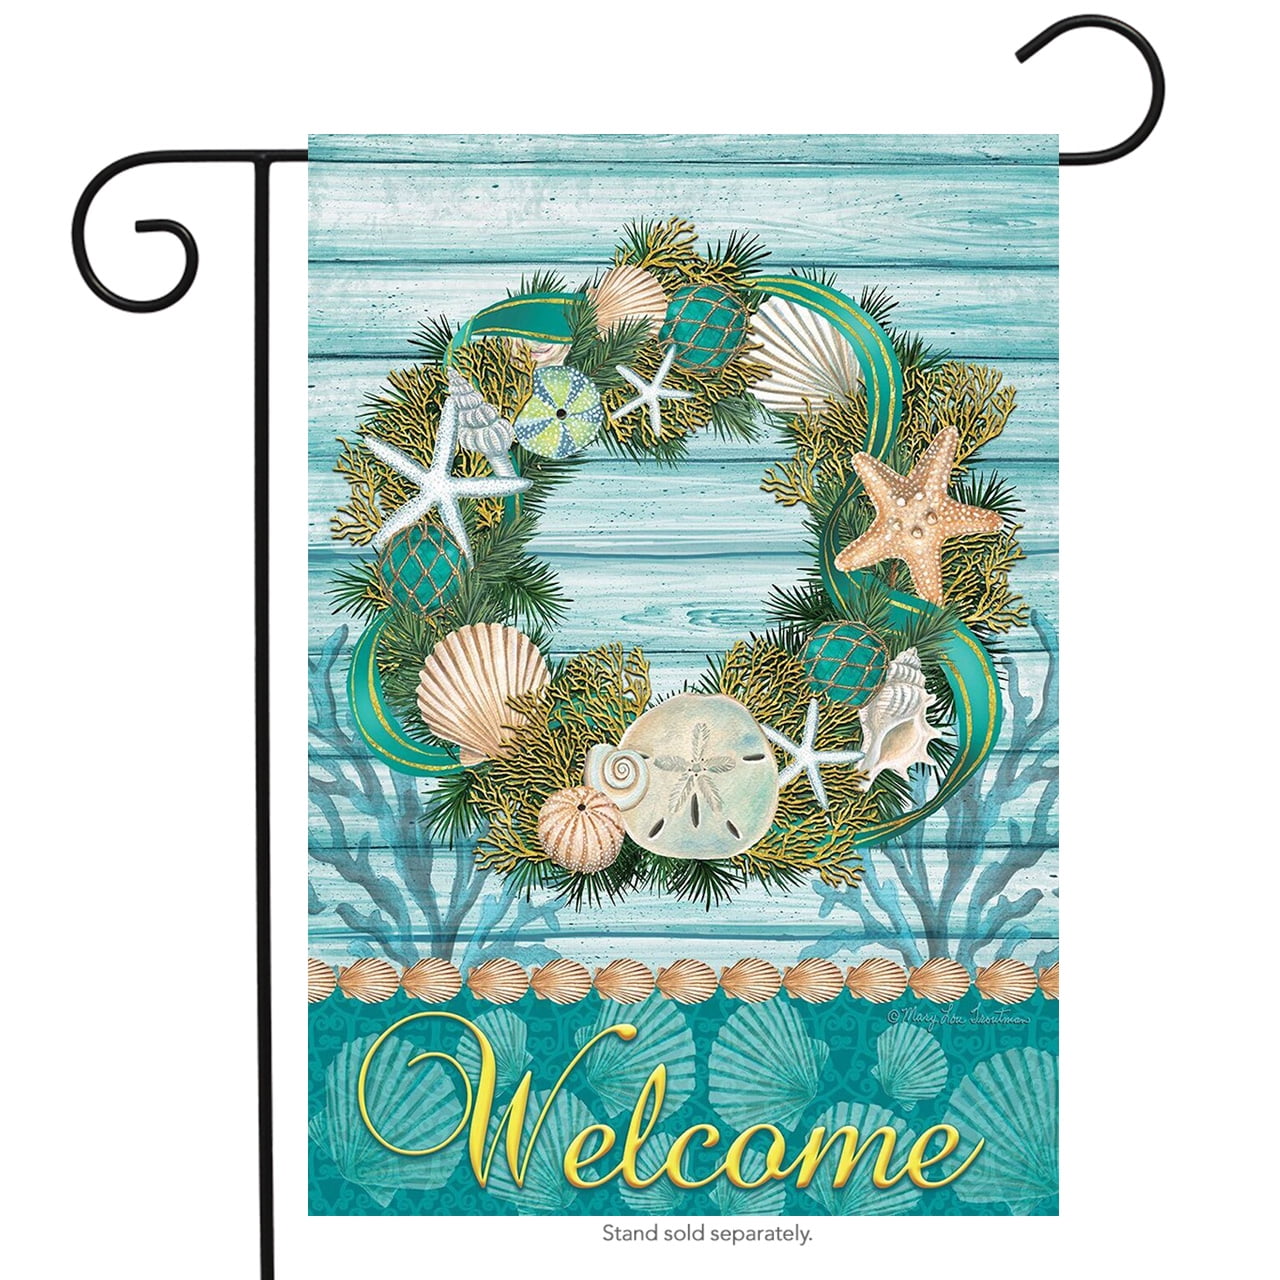 Covido Home Decorative Welcome Summer Coastal Hydrangea Flowers Garden Flag Nautical Yard Beach Shell Starfish Conch Outside Decoration Spring Ocean Outdoor Small Decor Double Sided 12x18 